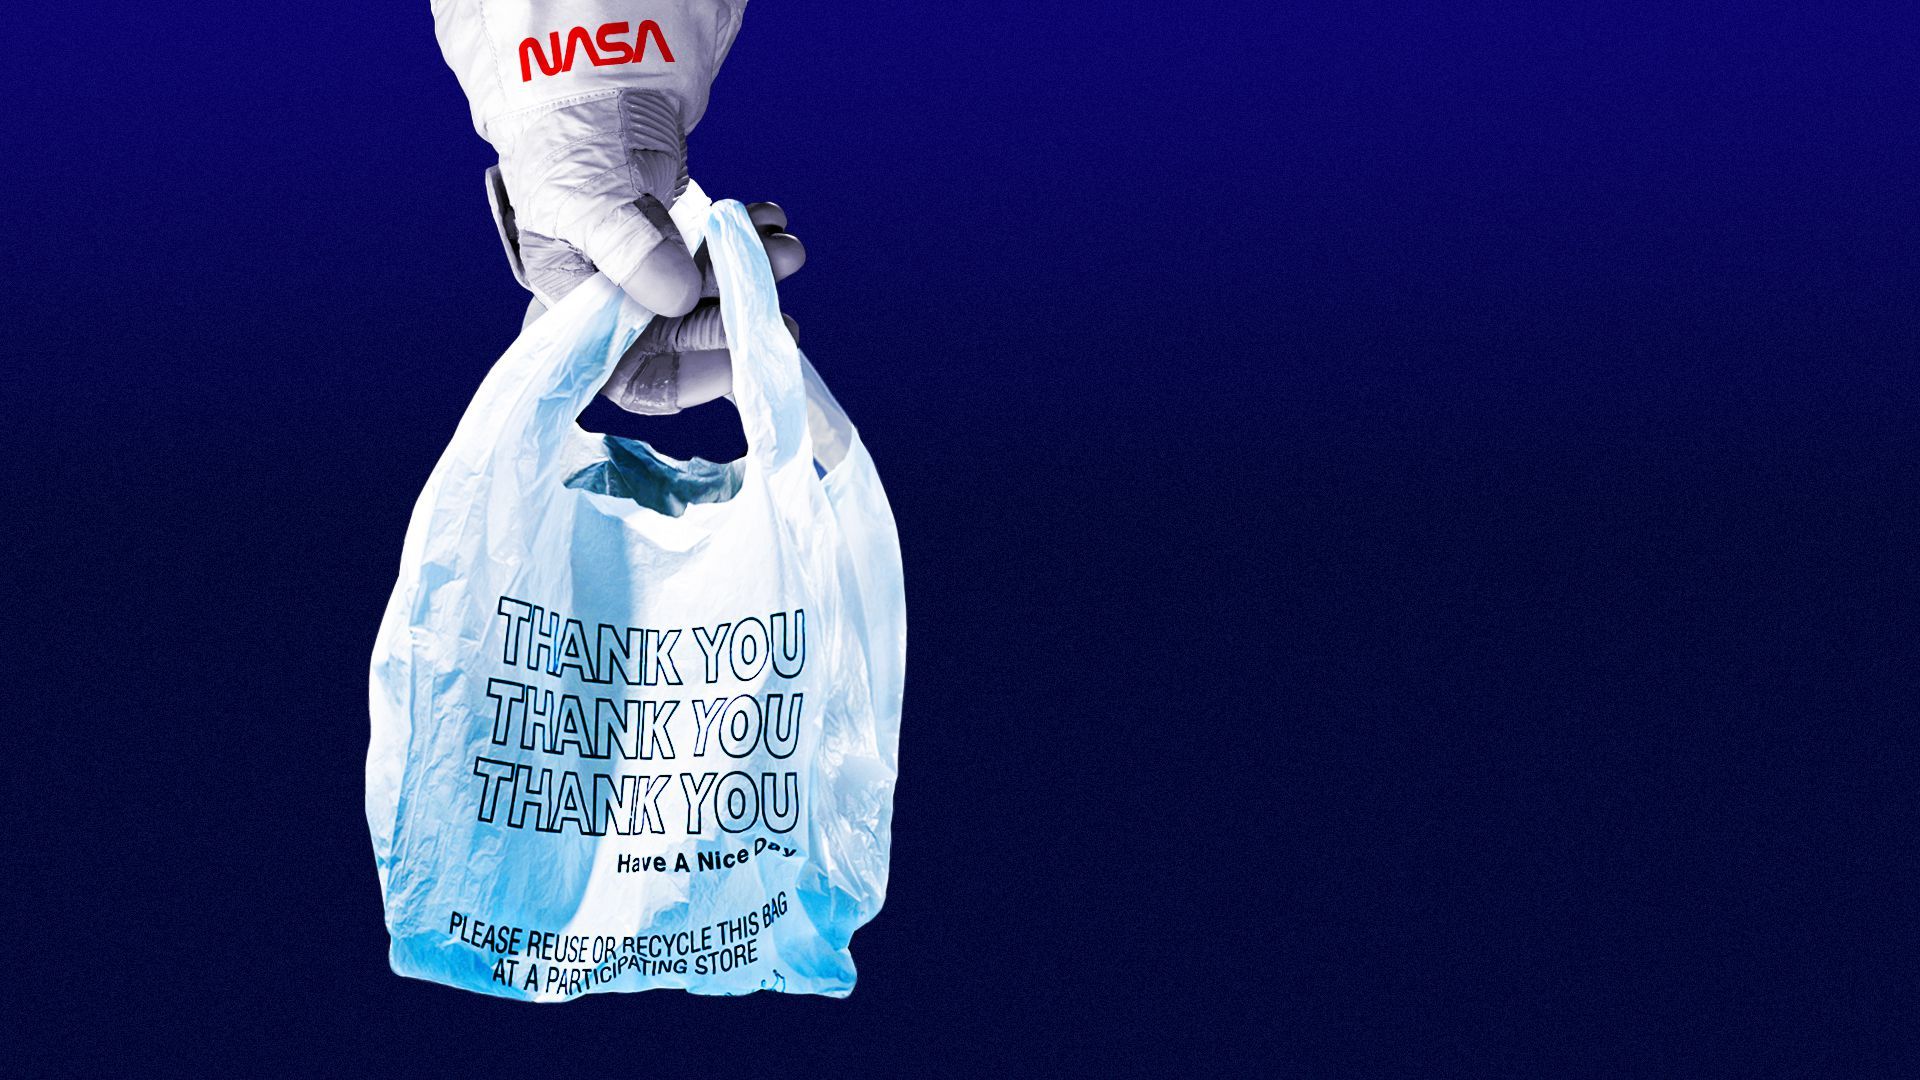 Illustration of a NASA astronaut's hand holding a plastic shopping bag